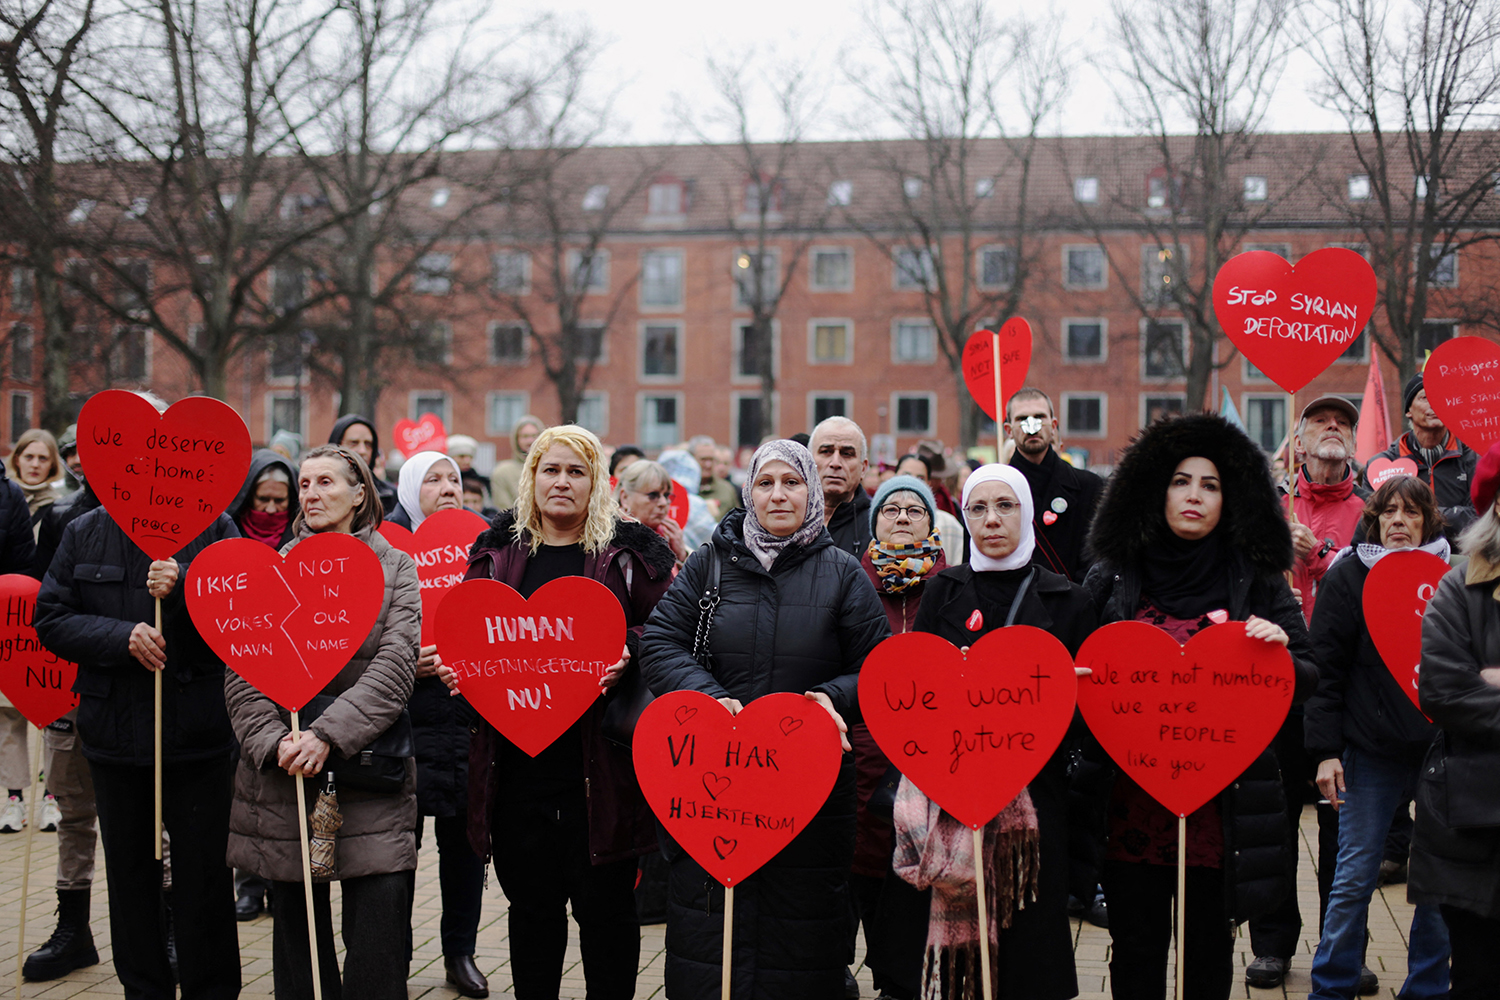 The Danish government's efforts to revoke protections for Syrian refugees